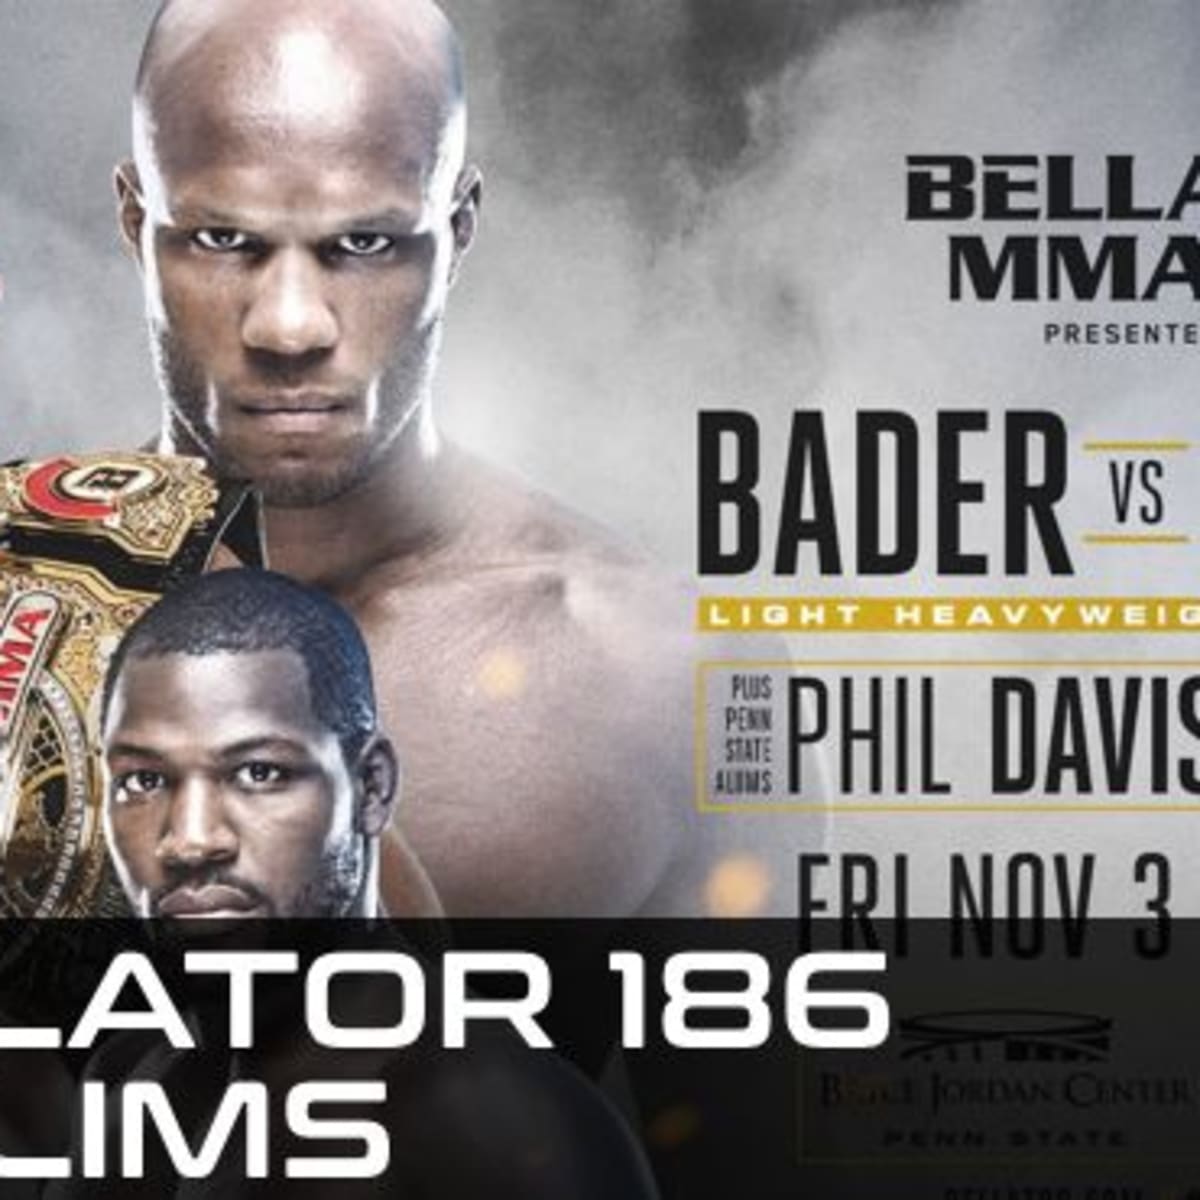 Watch the Bellator 186 Prelims, Streaming Live and Free